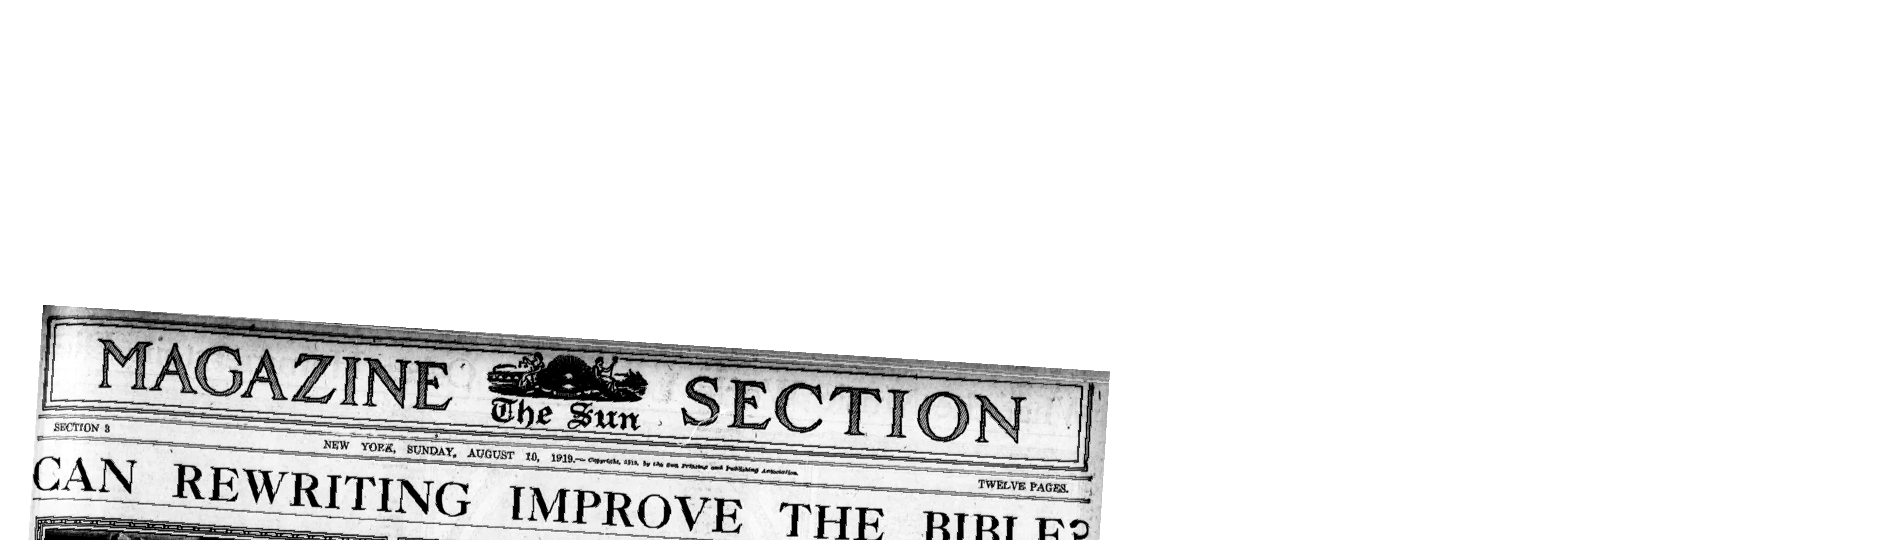 Newspaper header reading “The Sun Magazine Section, New York, Sunday August 10, 1919” with a headline reading “Can rewriting improve the Bible?”